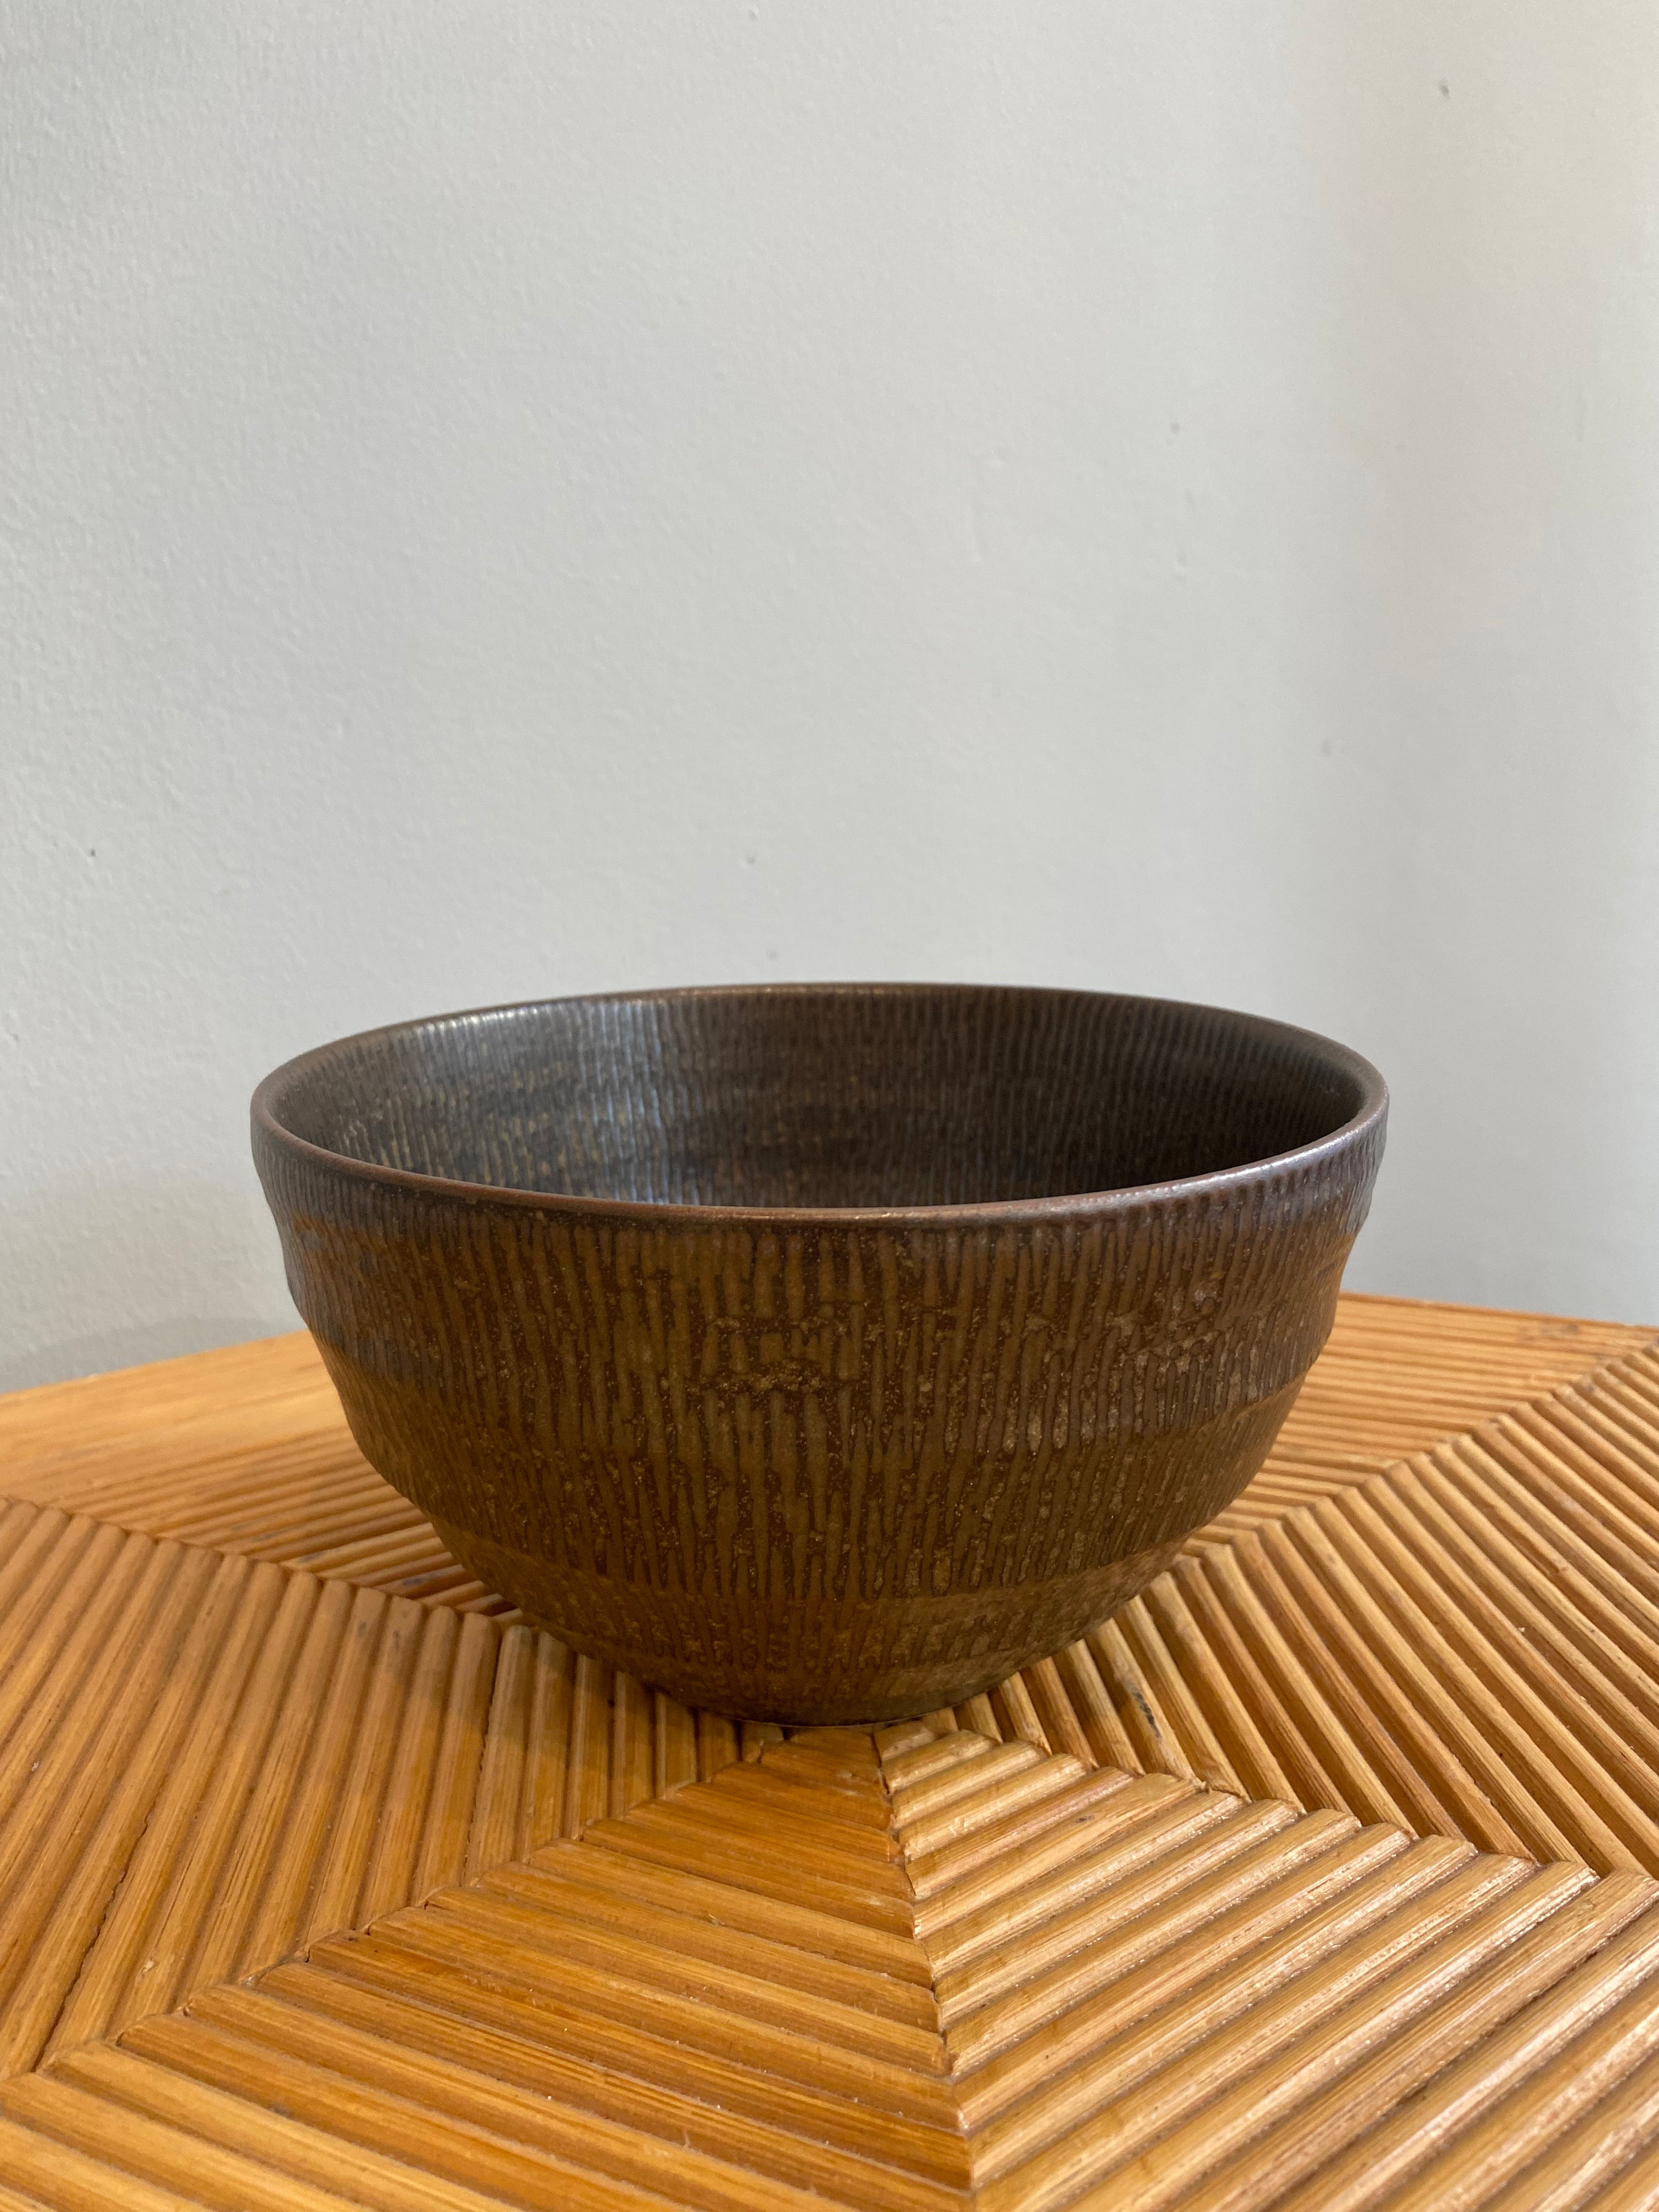 Tall rustic bowl with brown glaze